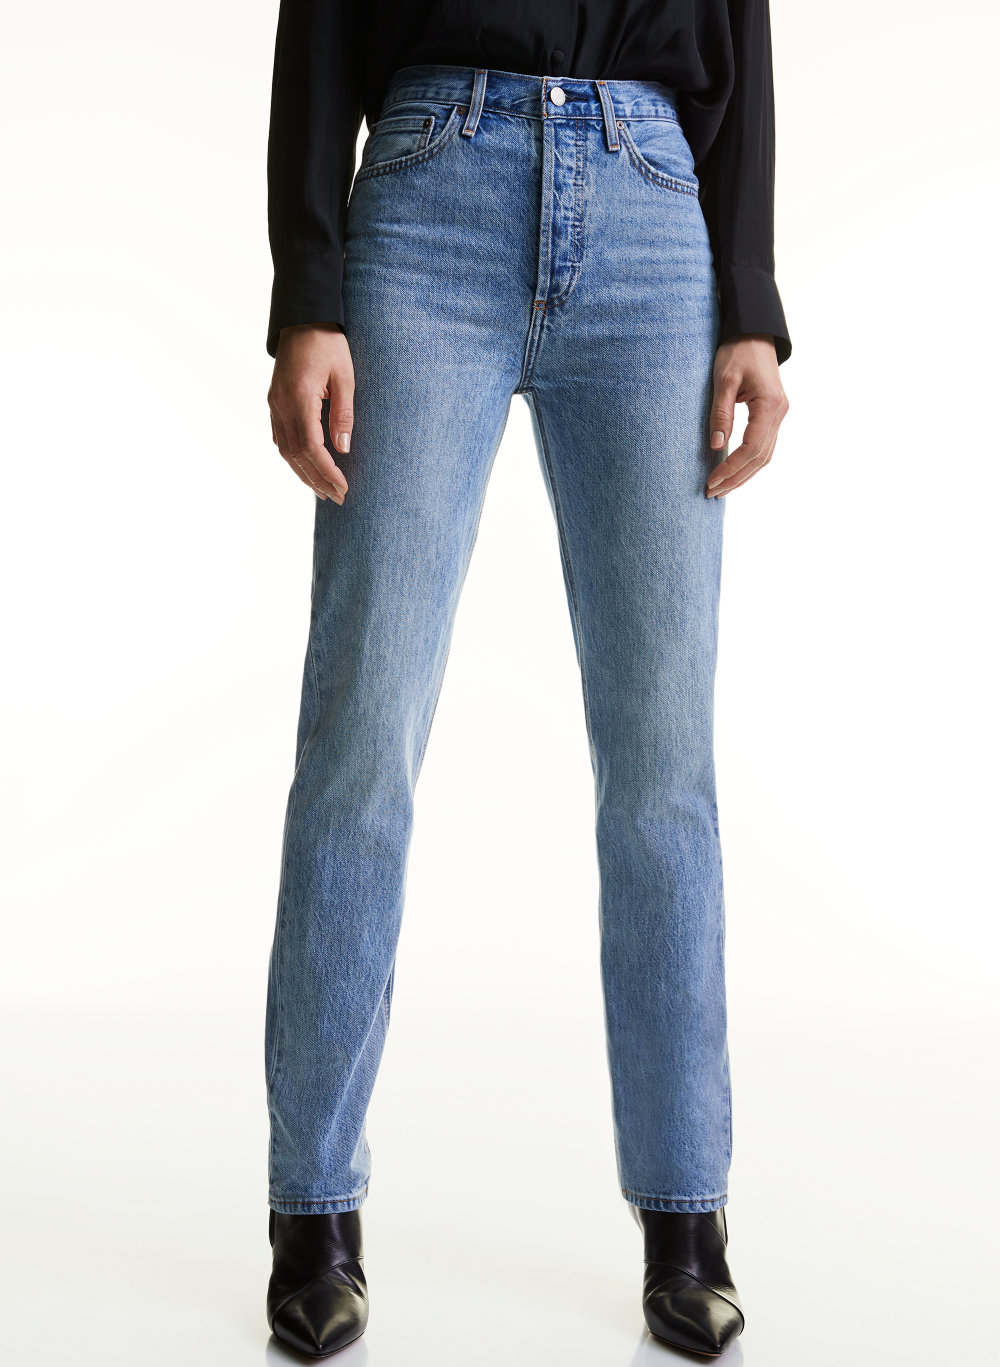 stovepipe jeans